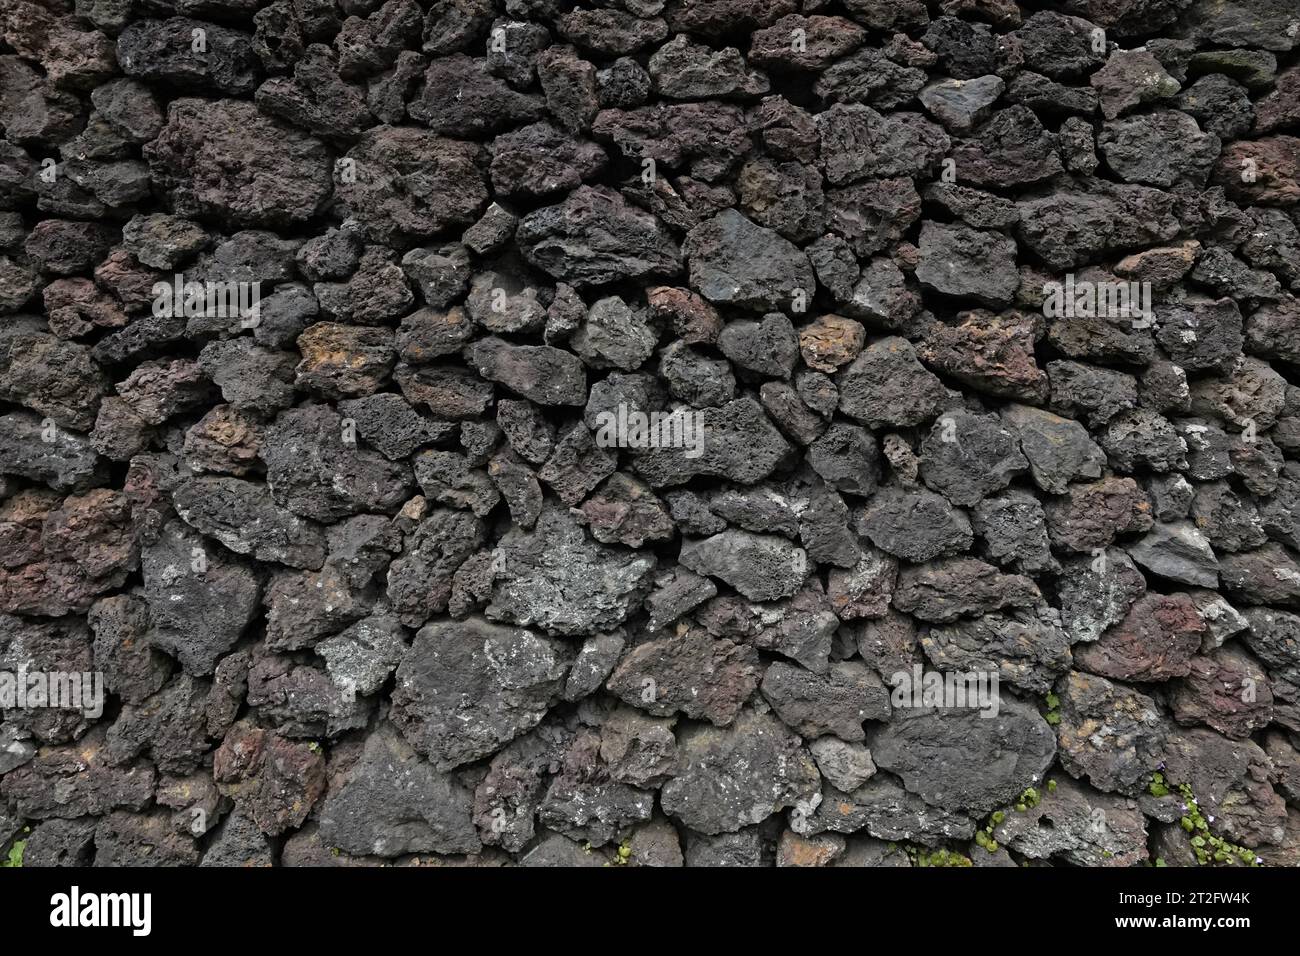 A wall made up of dark, volcanic pumice rocks is shown in a closeup, exterior view during the day. Stock Photo